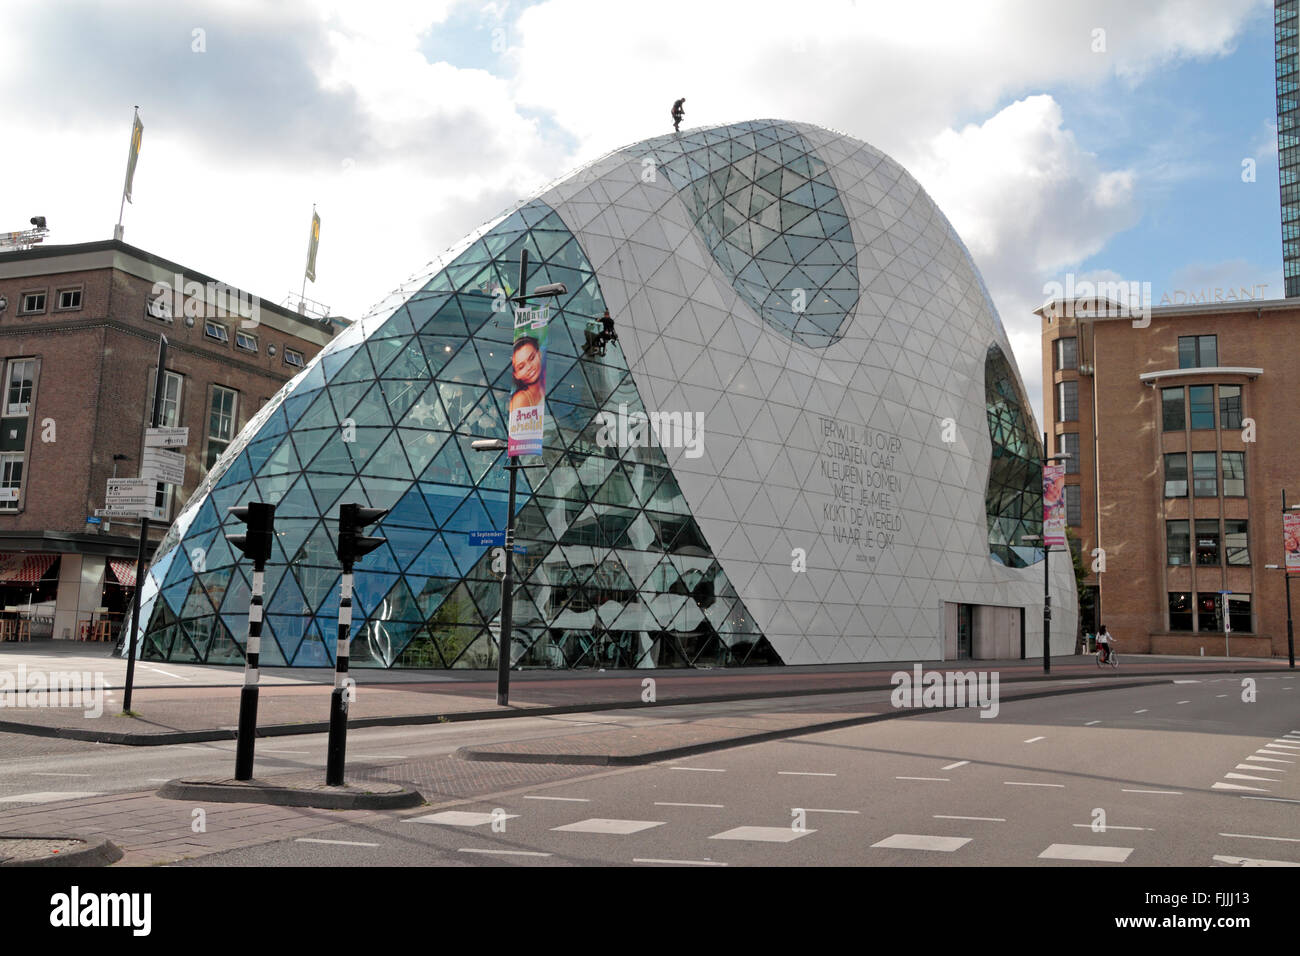 'The Blob', designed by Massimiliano Fuksas in Eindhoven, Noord-Brabant, Netherlands. Stock Photo